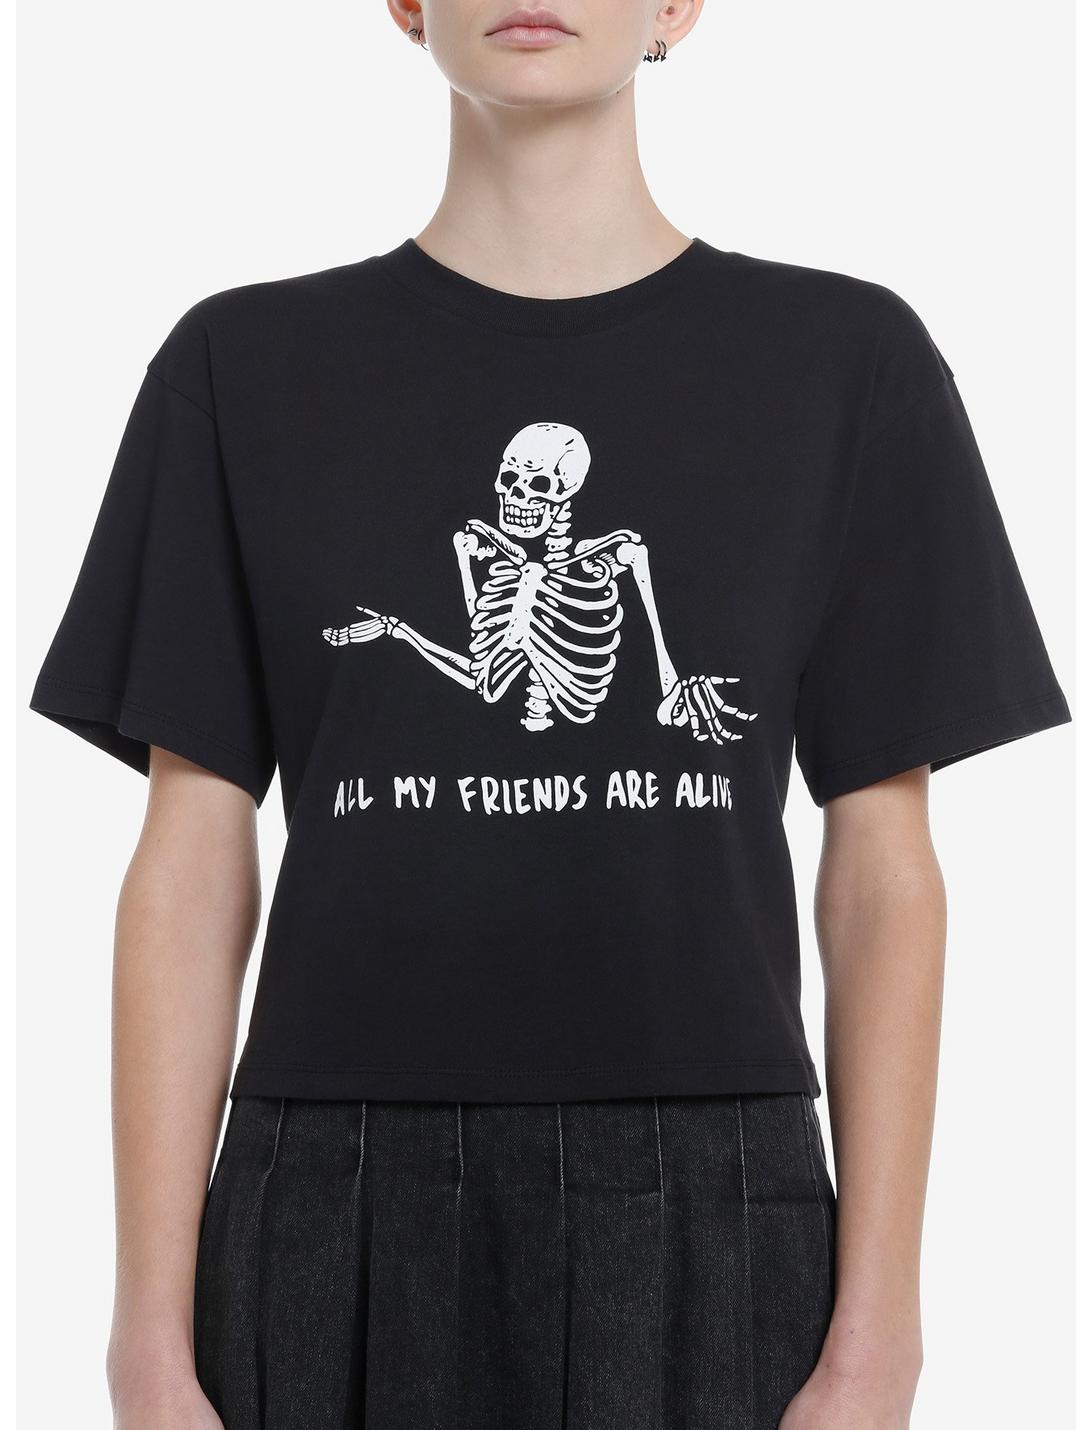 All My Friends Are Dead Girls Crop T-Shirt By Friday Jr., MULTI, hi-res